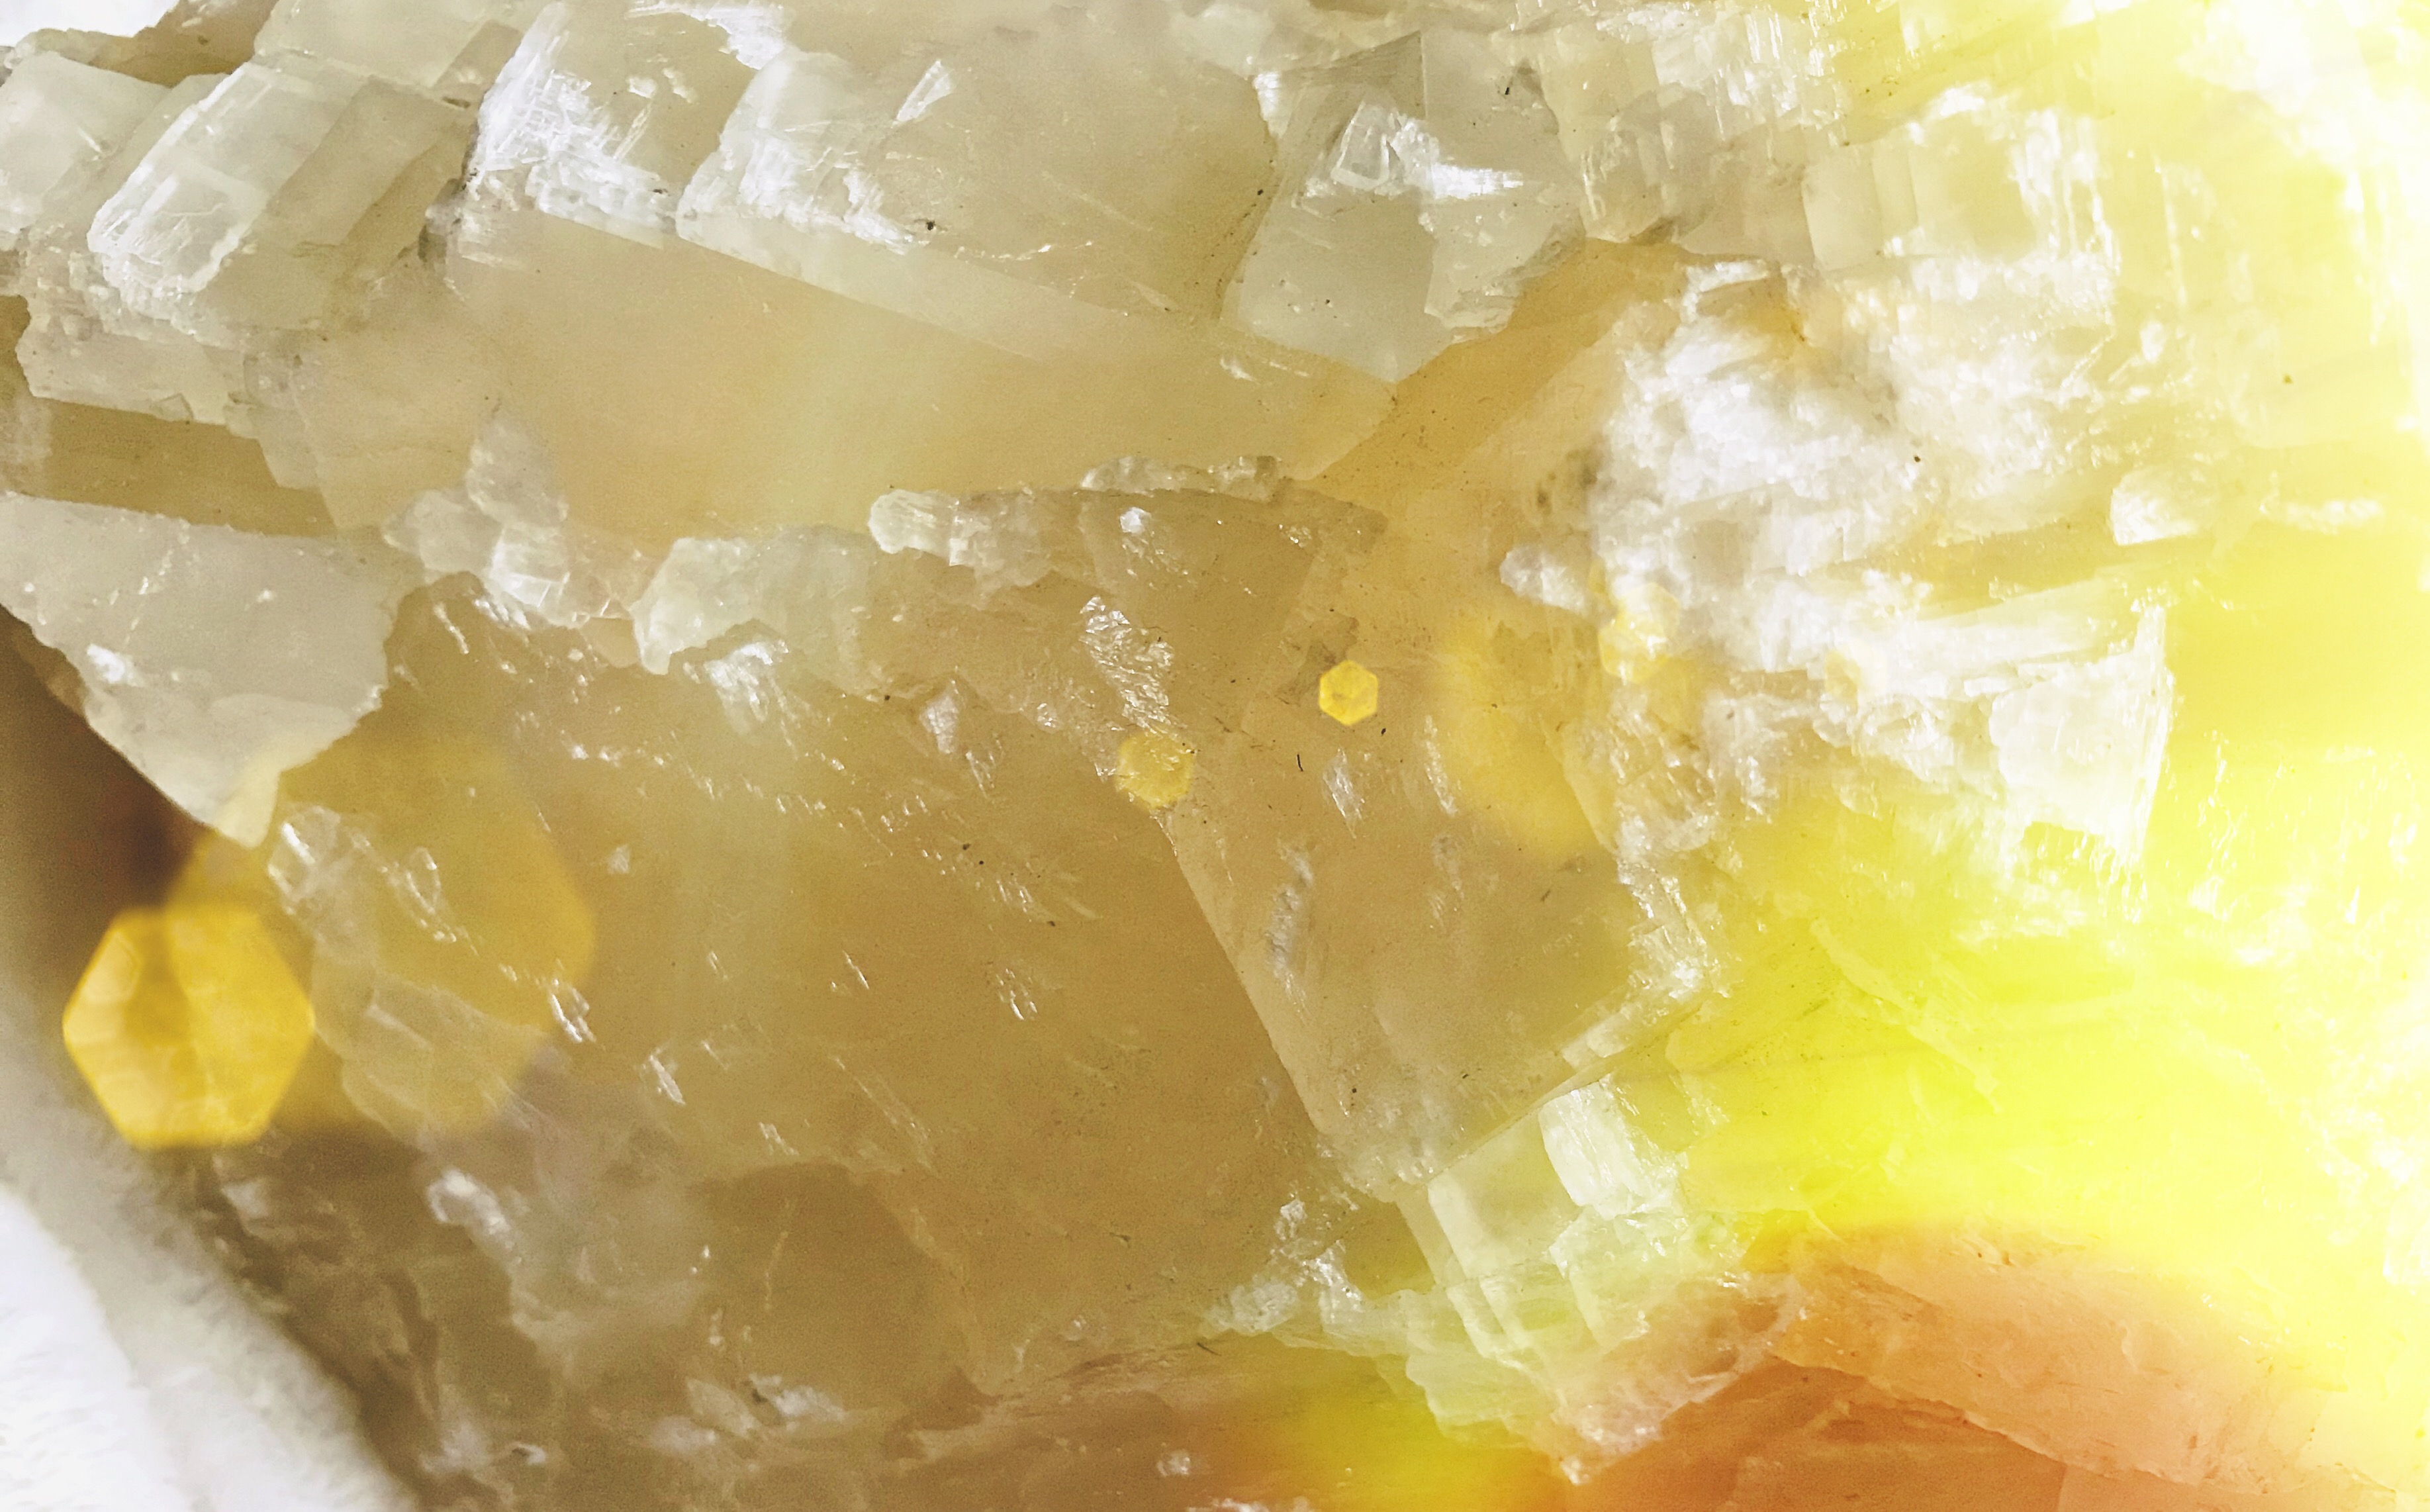 Crystals and Dreamtime